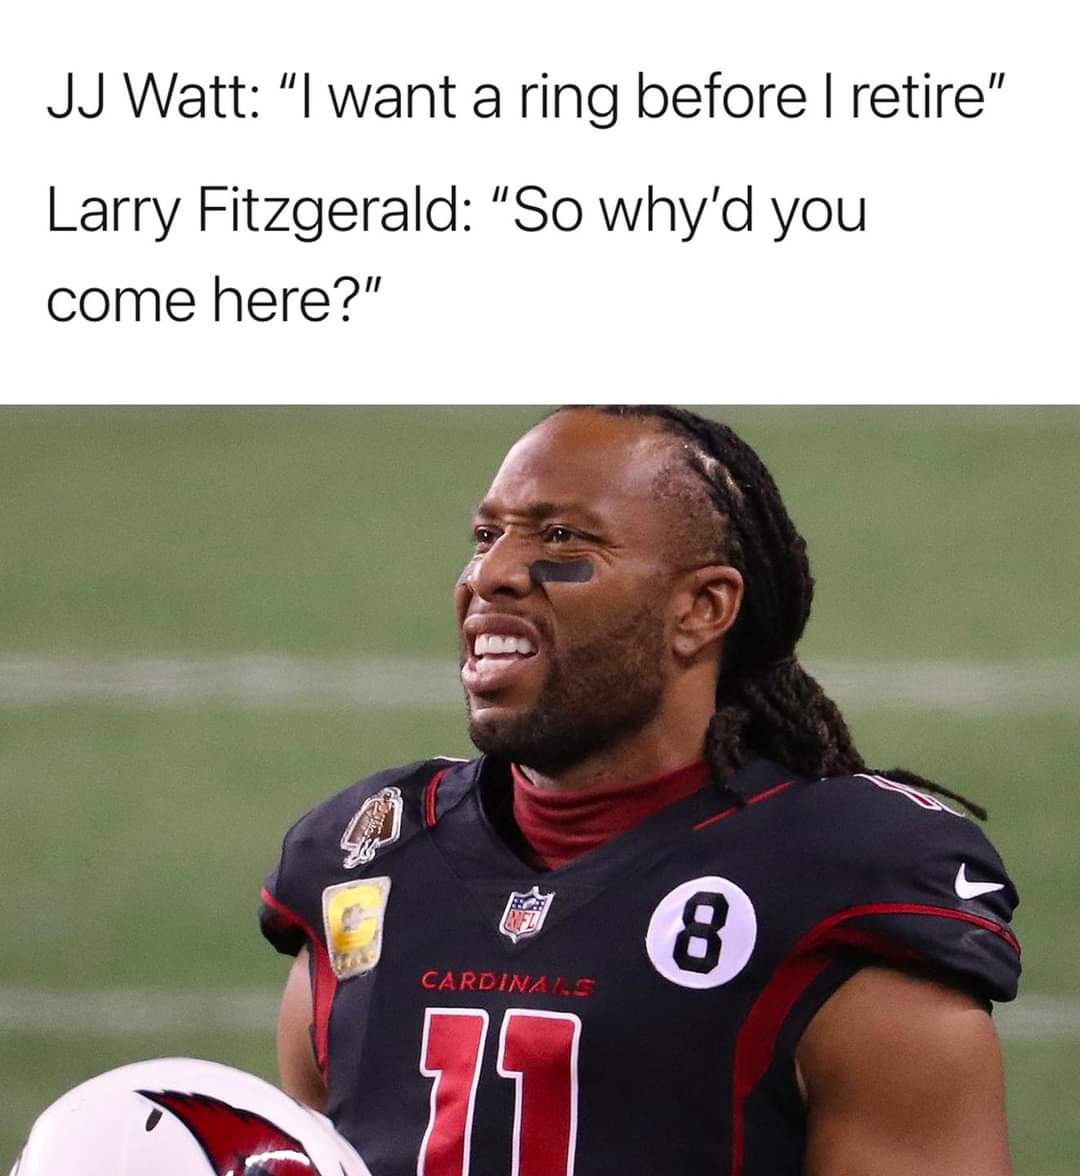 football player - Jj Watt "I want a ring before I retire" Larry Fitzgerald "So why'd you come here?" 8 Cardinals 71